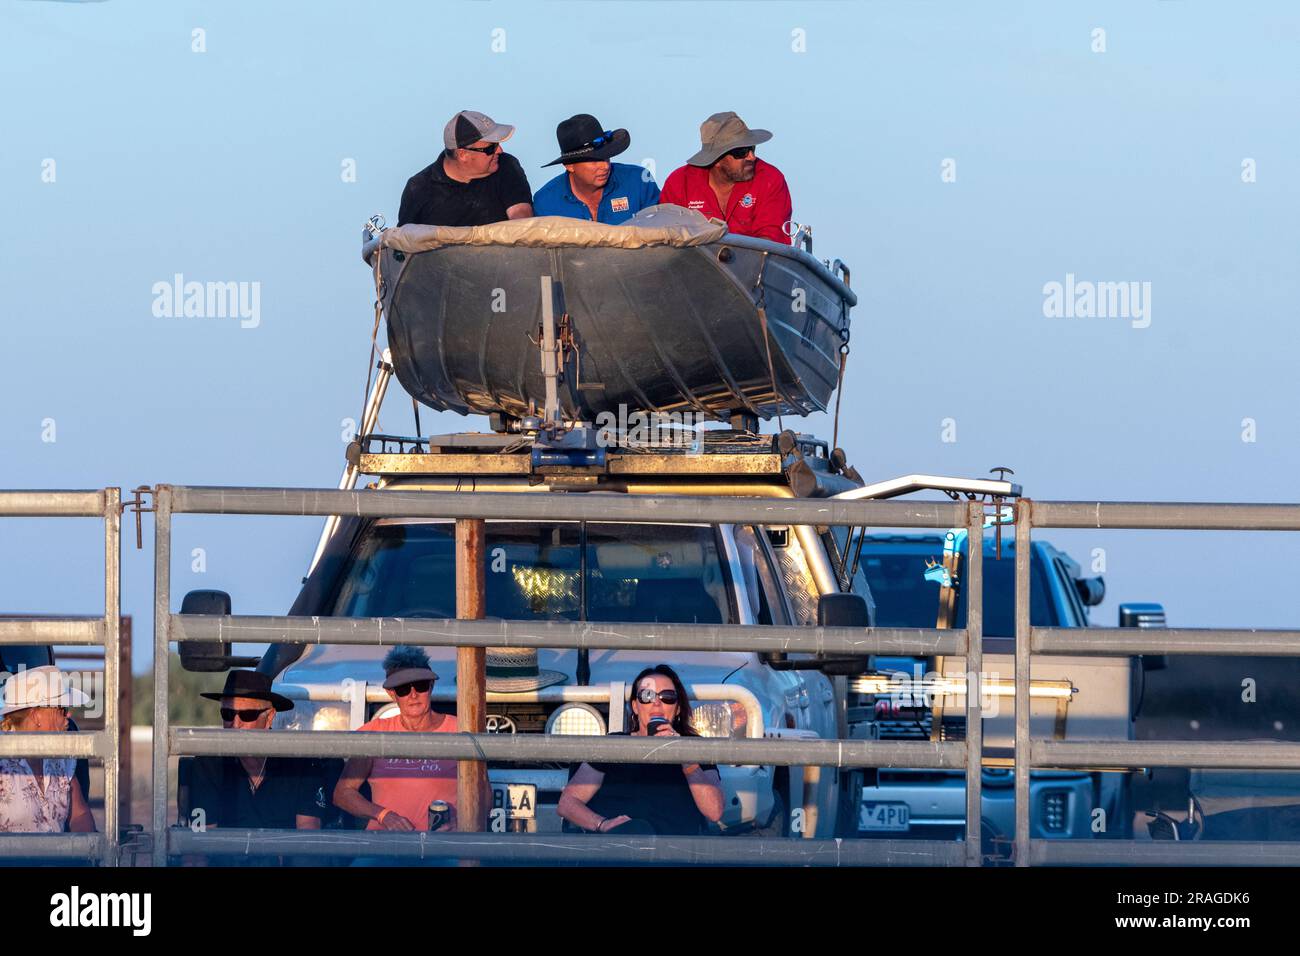 Three men in a dinghy mounted on the roof of a car watching a rodeo, Brunette Downs ABC Amateur Bush races,Northern Territory, NT, Australia Stock Photo